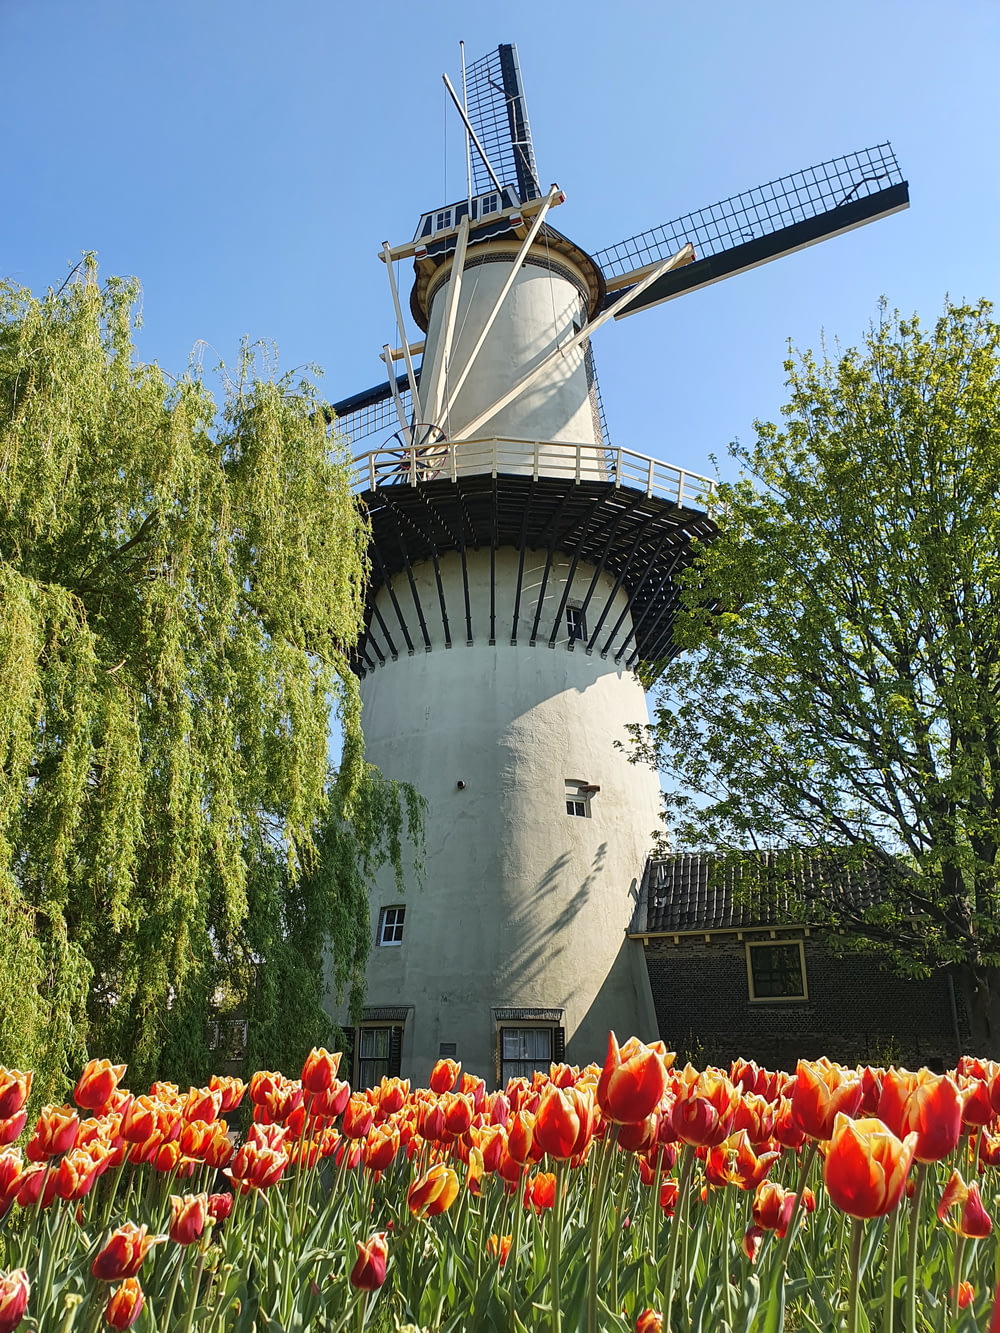 a windmill with red flowers with De Gooyer Windmill in the background